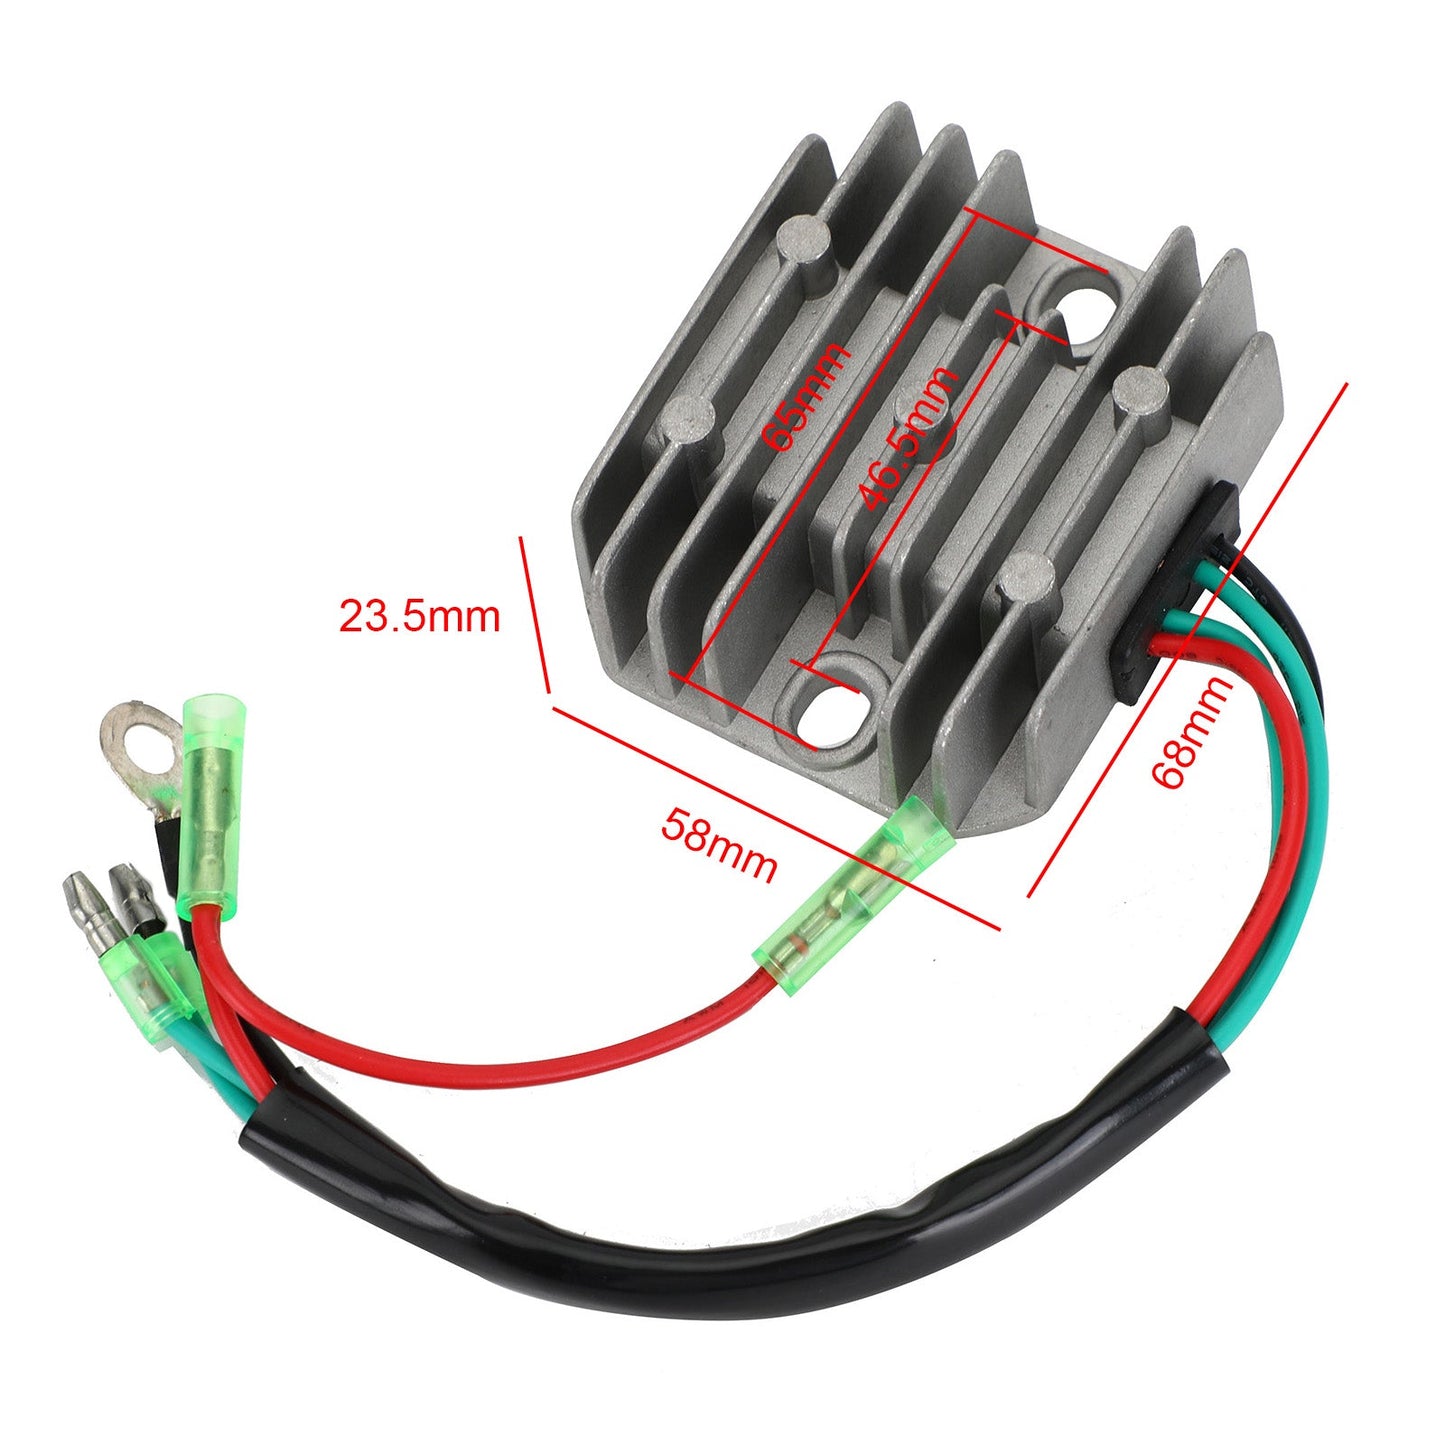 Regulator Rectifier Fit for Yamaha F8 F9.9 F15 Hp Outboard Motor 6G8-81960-A1